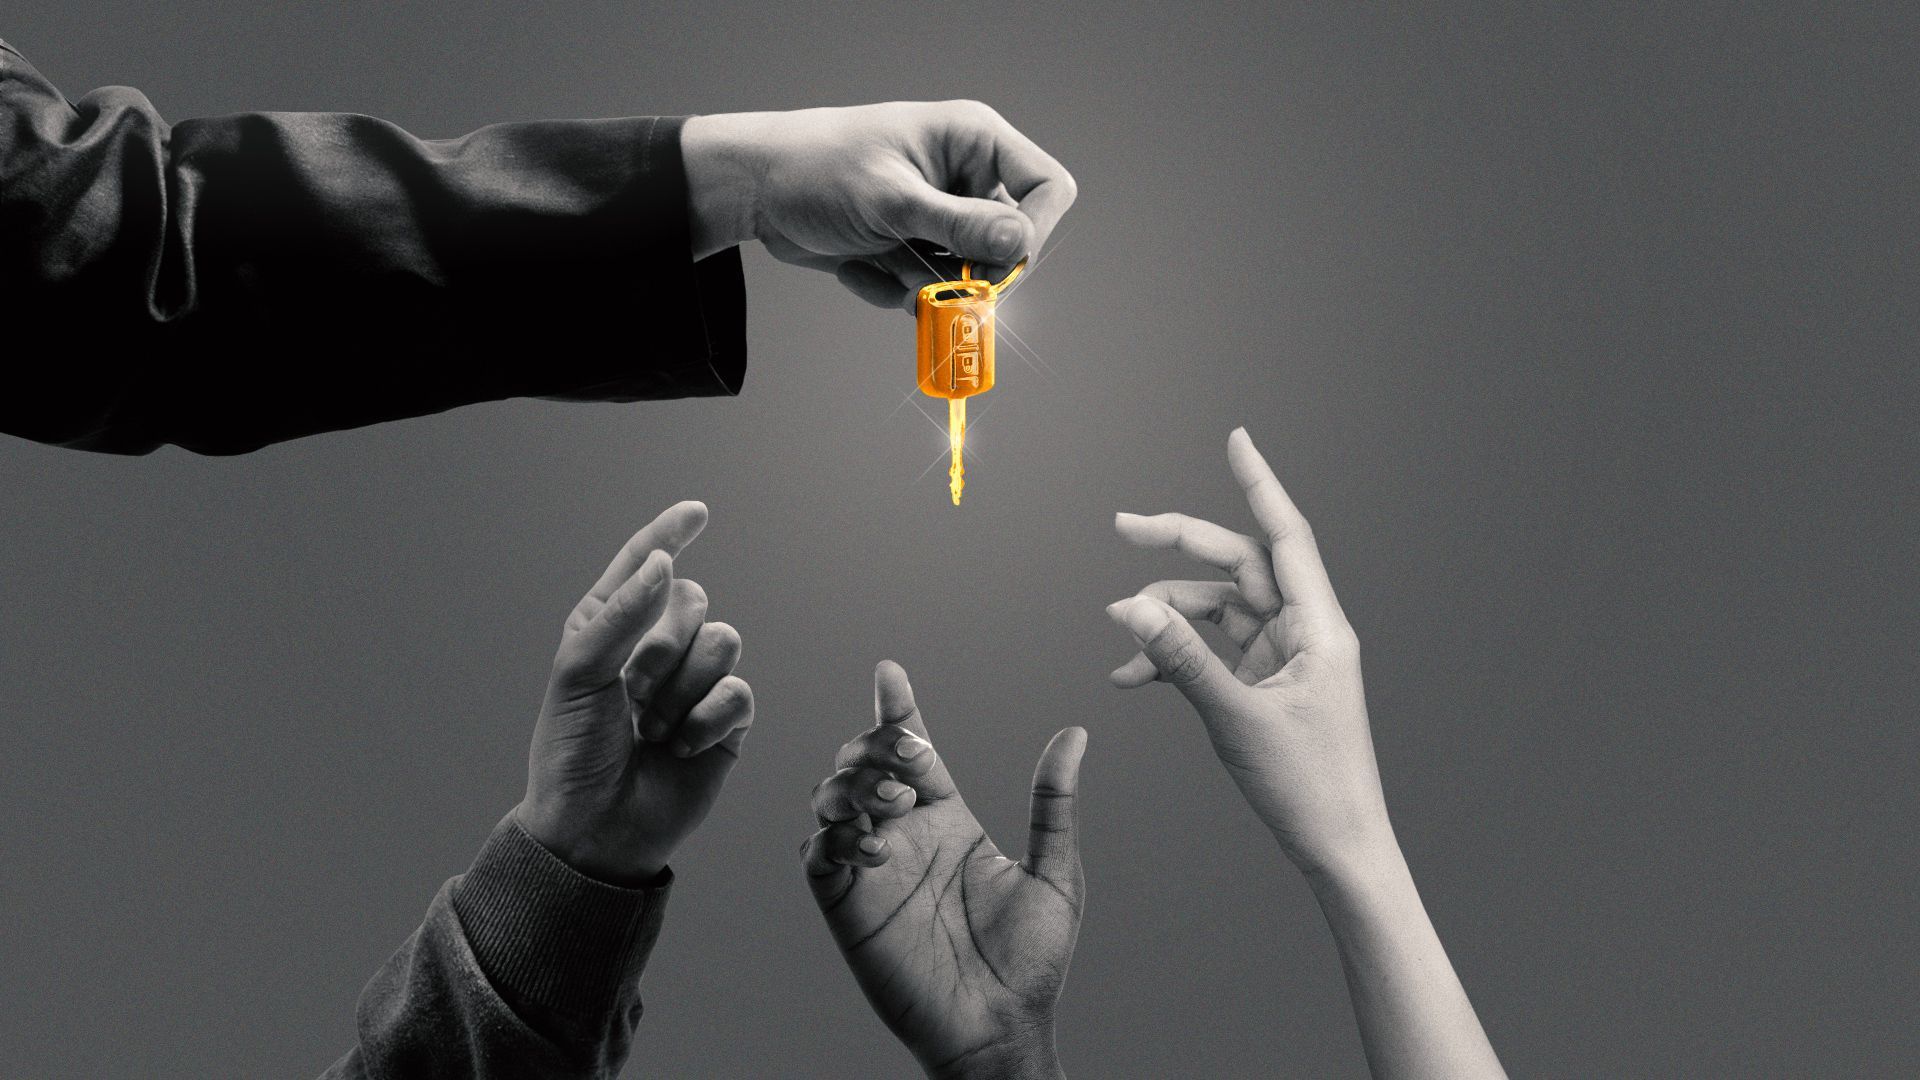 Illustration of many hands reaching for a golden car key.